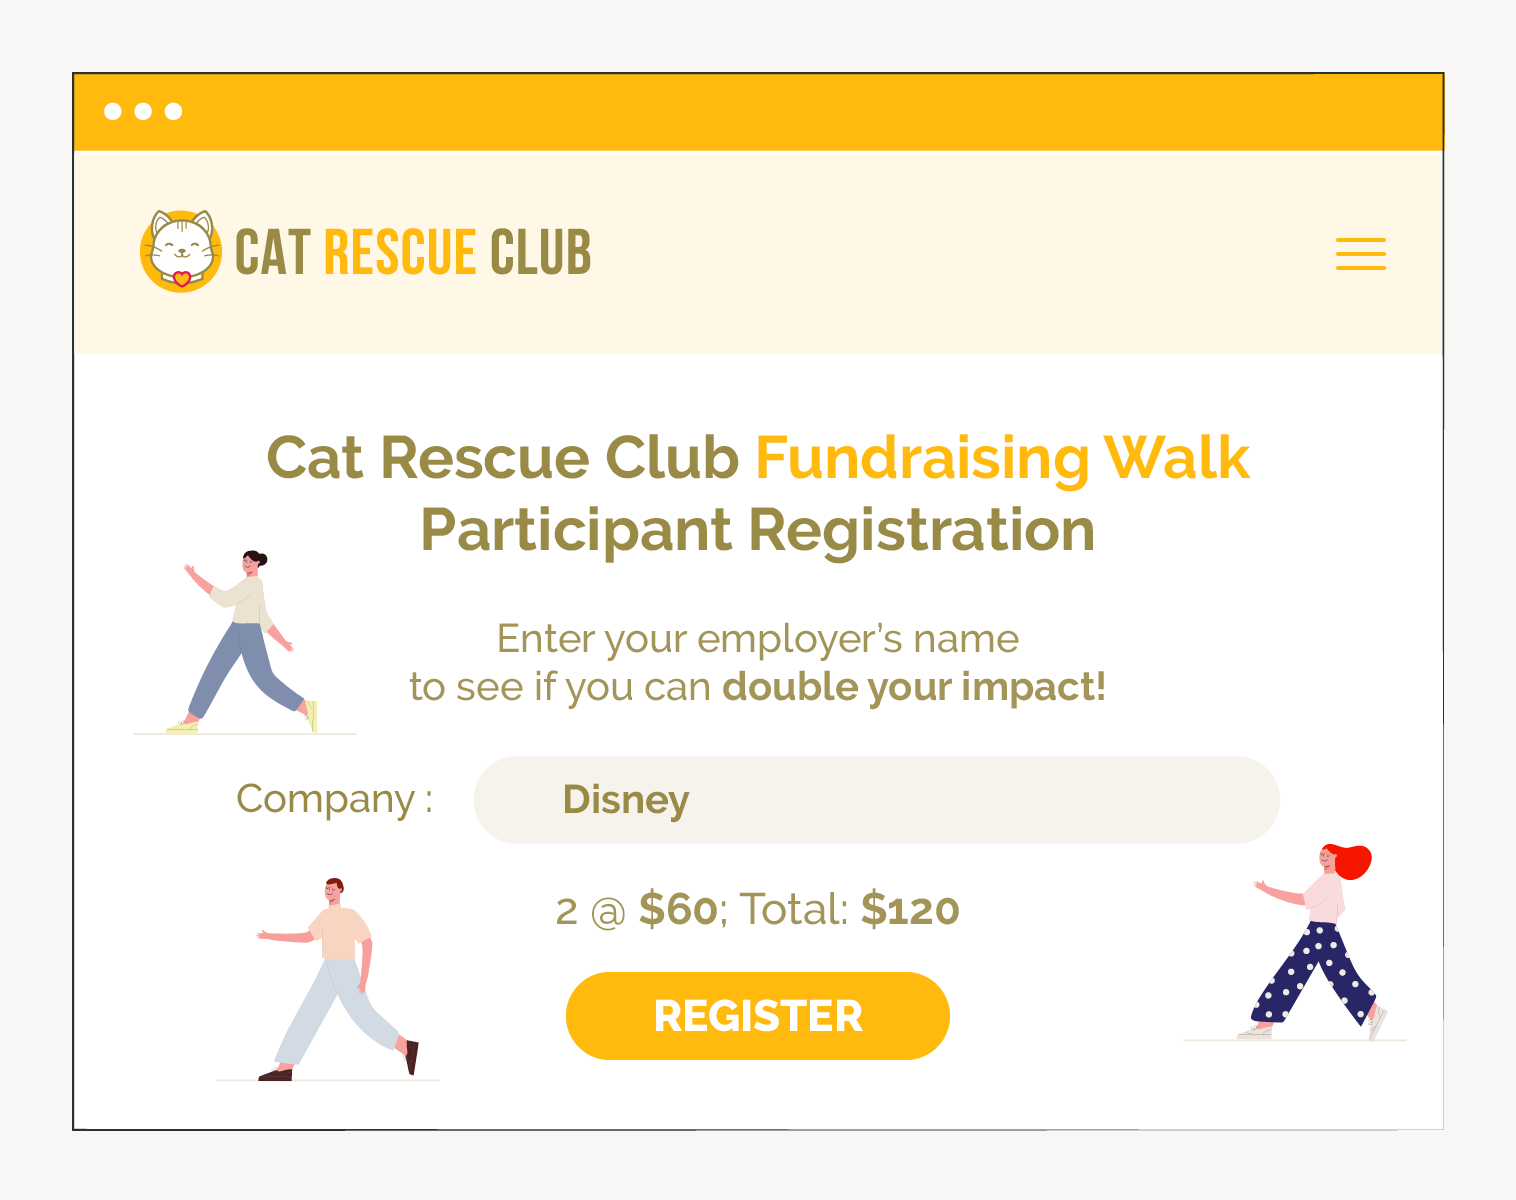 Matching gifts for peer-to-peer fundraising registration fees